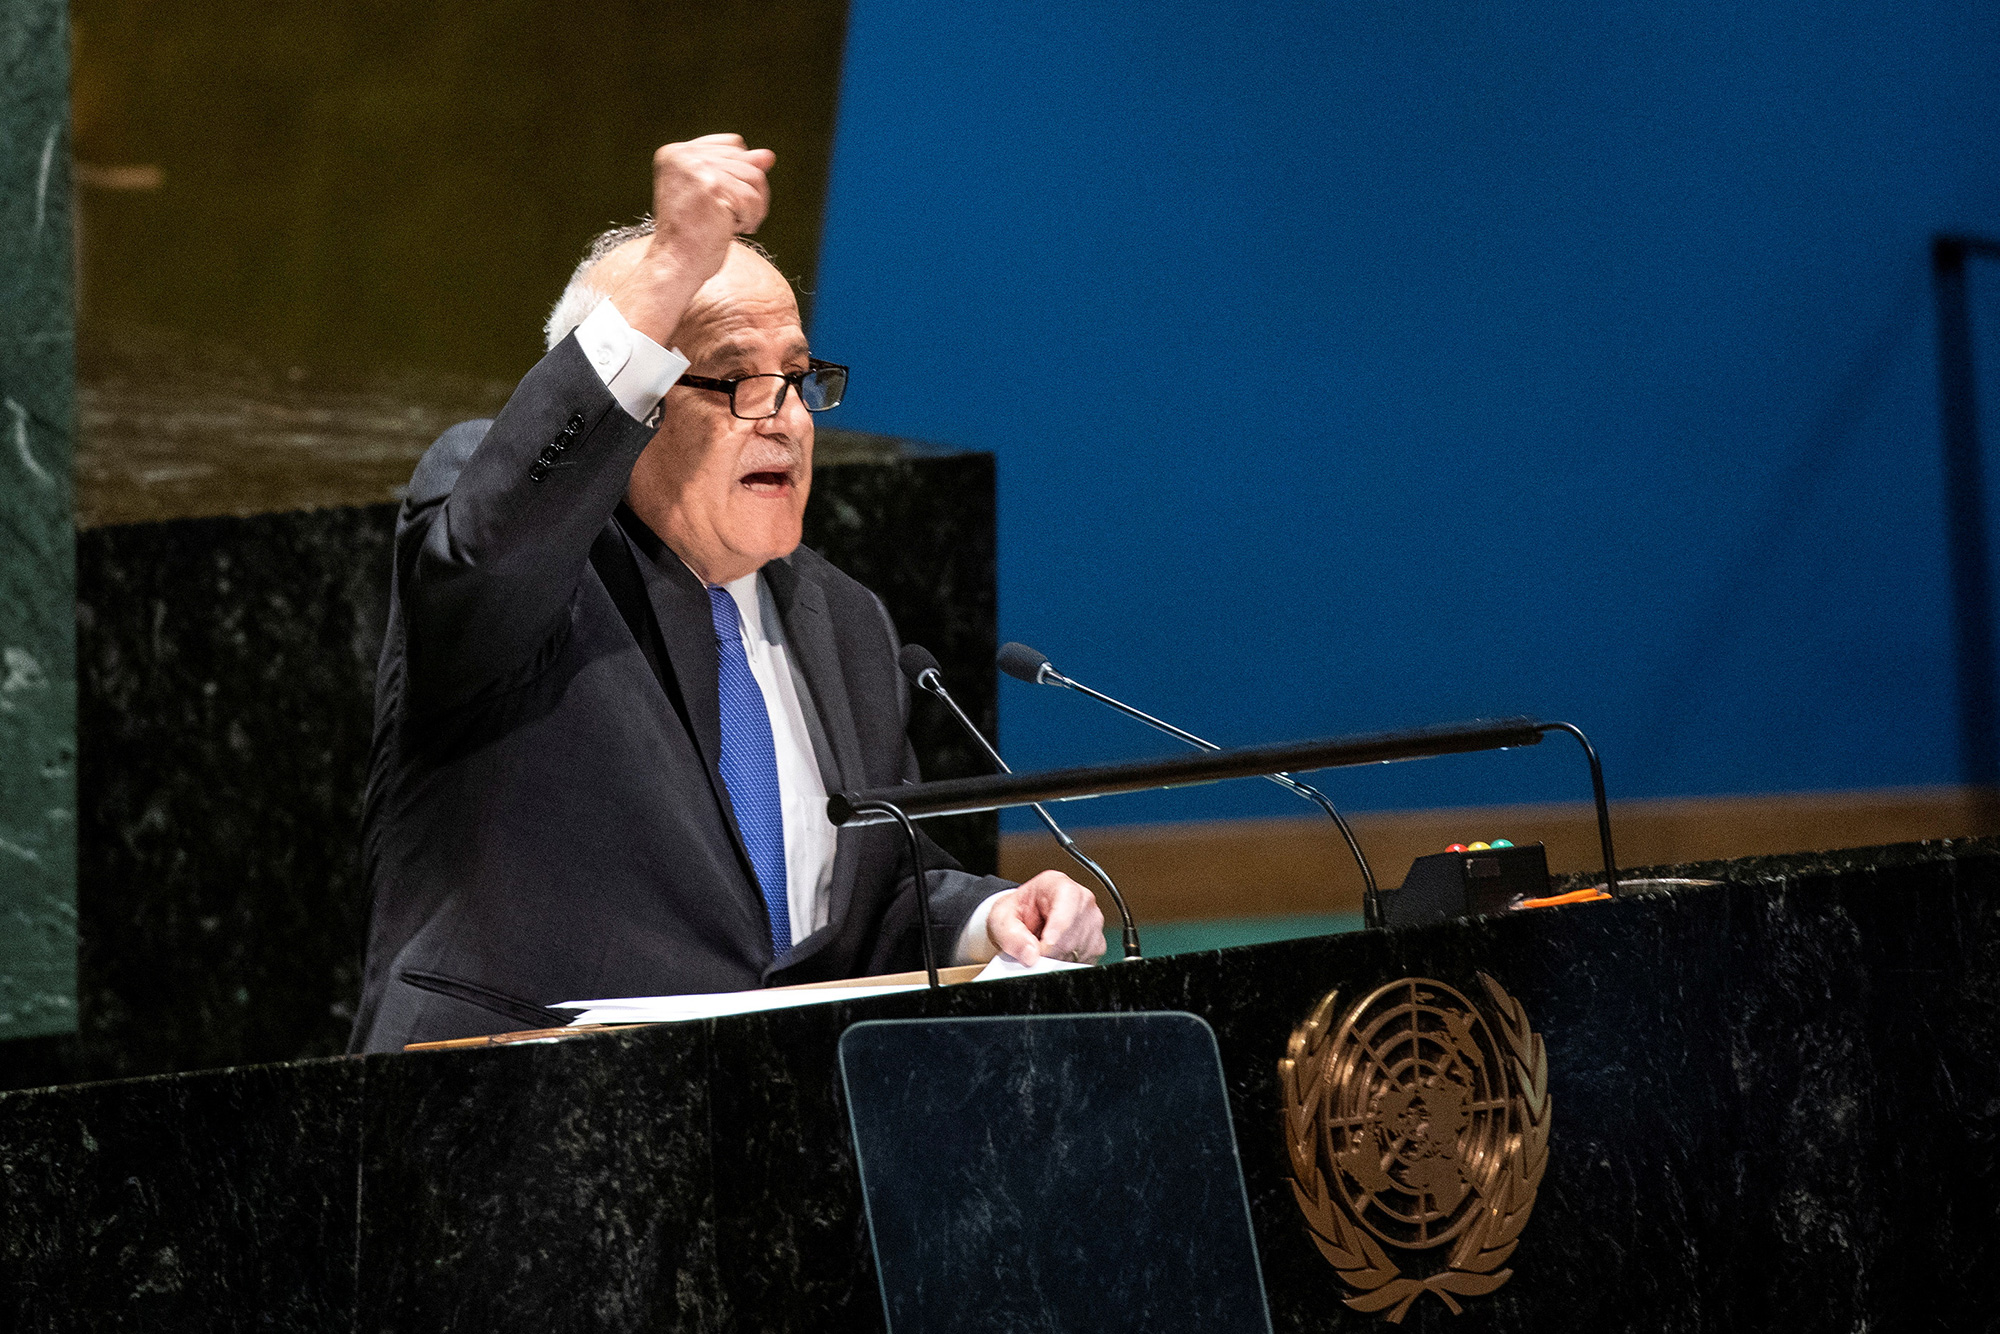 Palestinian Ambassador to the United Nations Riyad Mansour gestures to delegates after addressing them during the UN General Assembly in New York, on May 10.